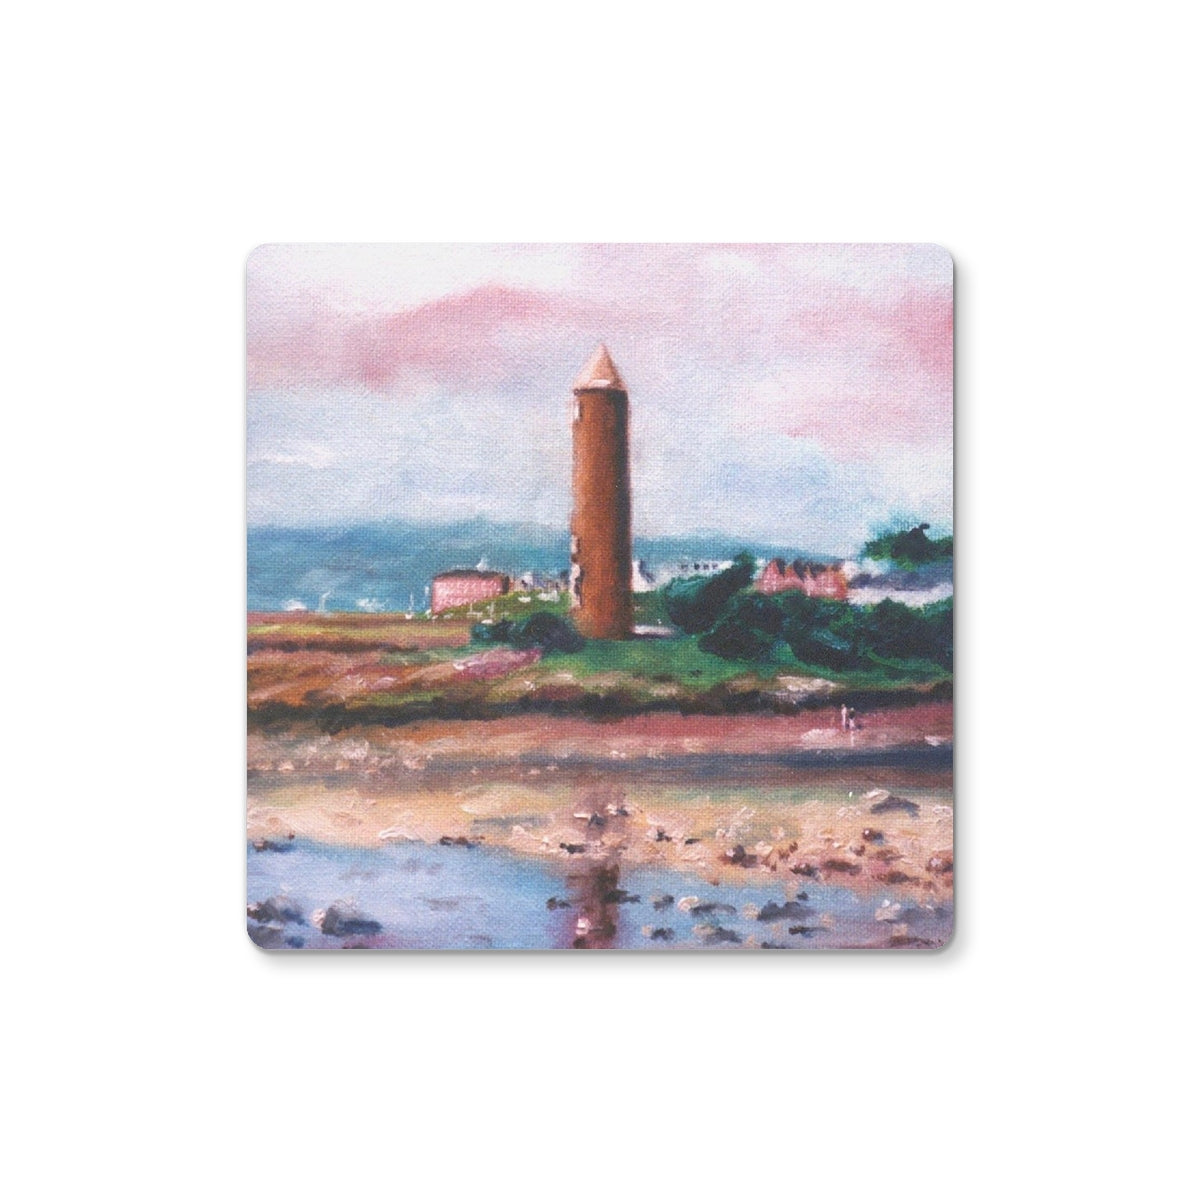 Pencil Point Largs Art Gifts Coaster-Coasters-River Clyde Art Gallery-2 Coasters-Paintings, Prints, Homeware, Art Gifts From Scotland By Scottish Artist Kevin Hunter